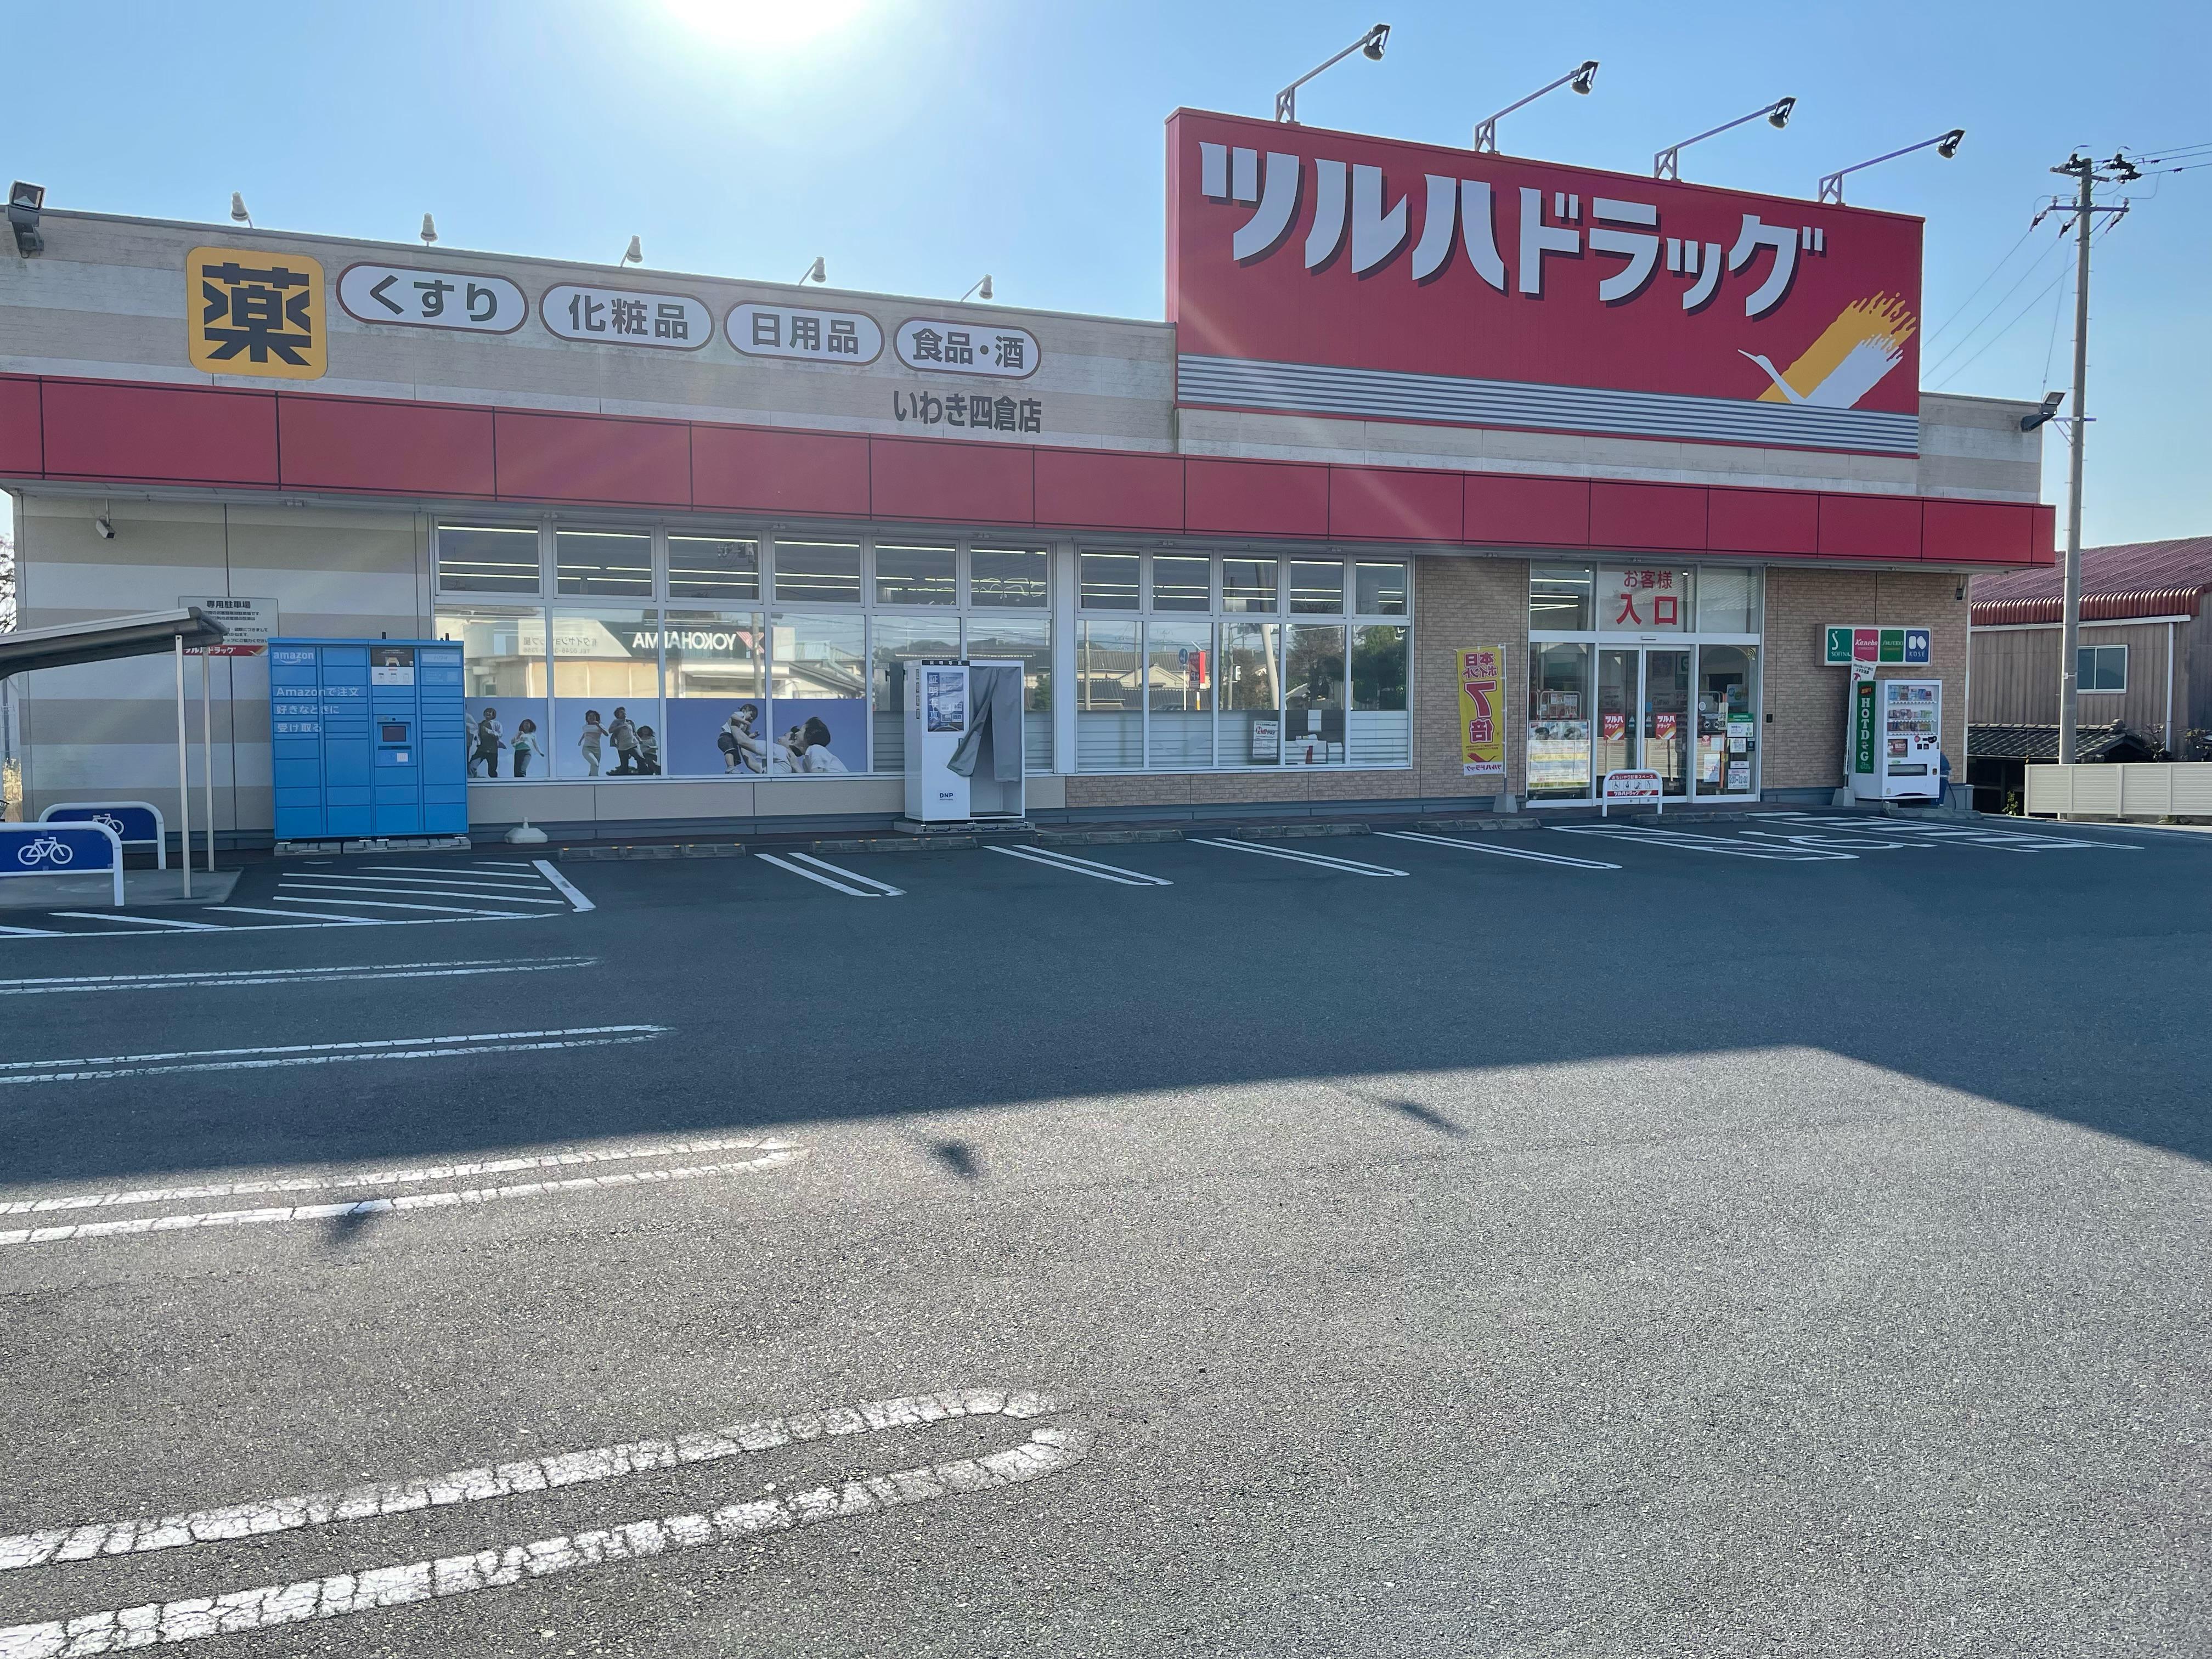 Images ツルハドラッグ いわき四倉店